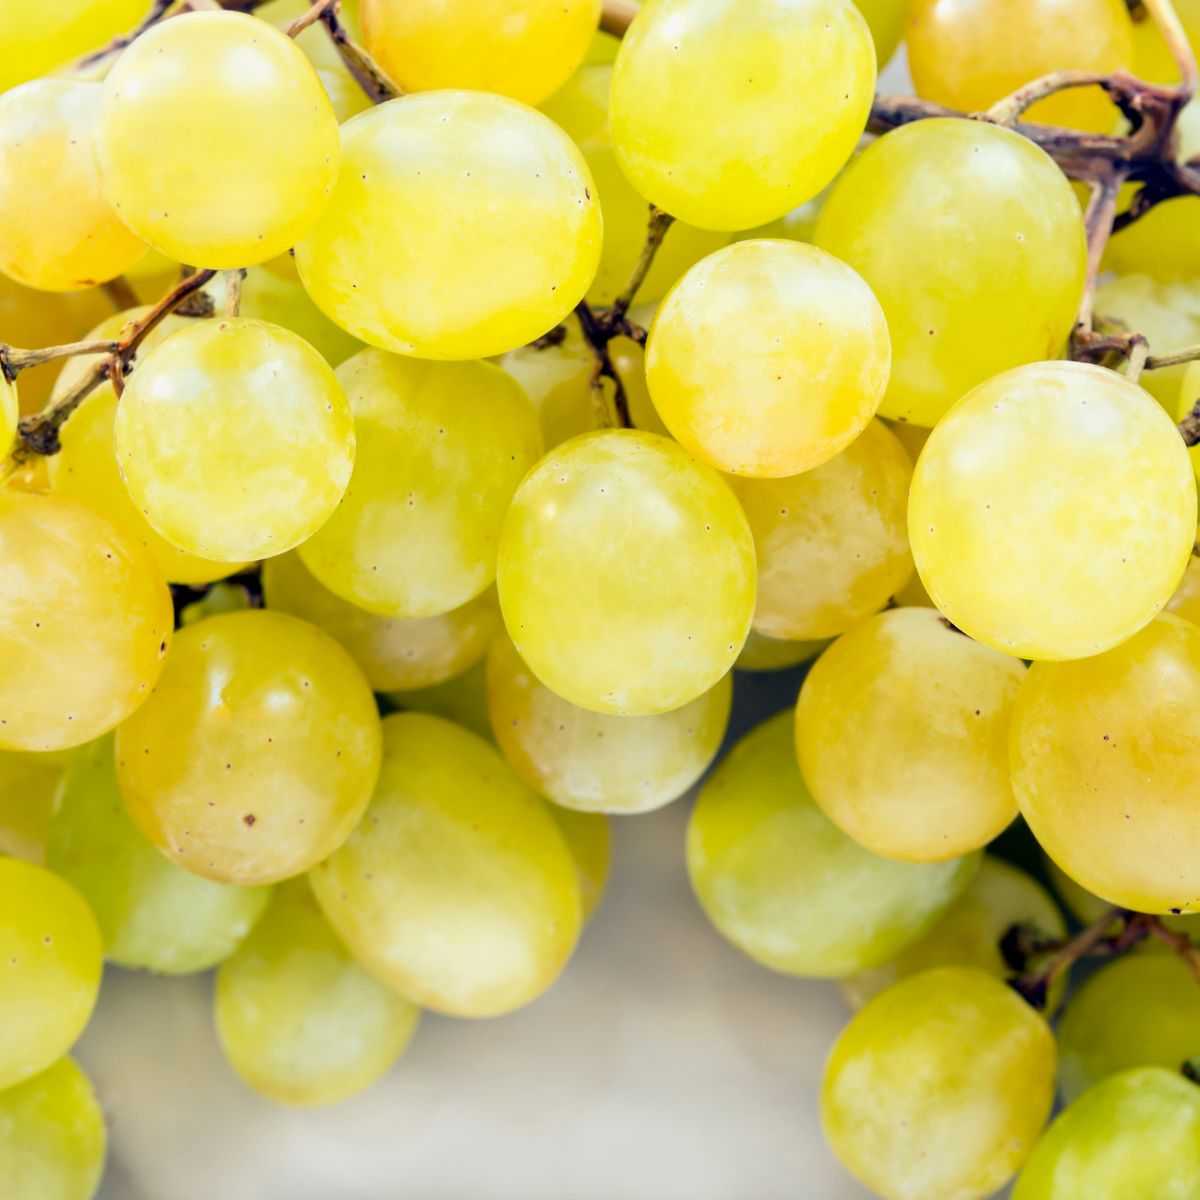 A bunch of yellow grapes.